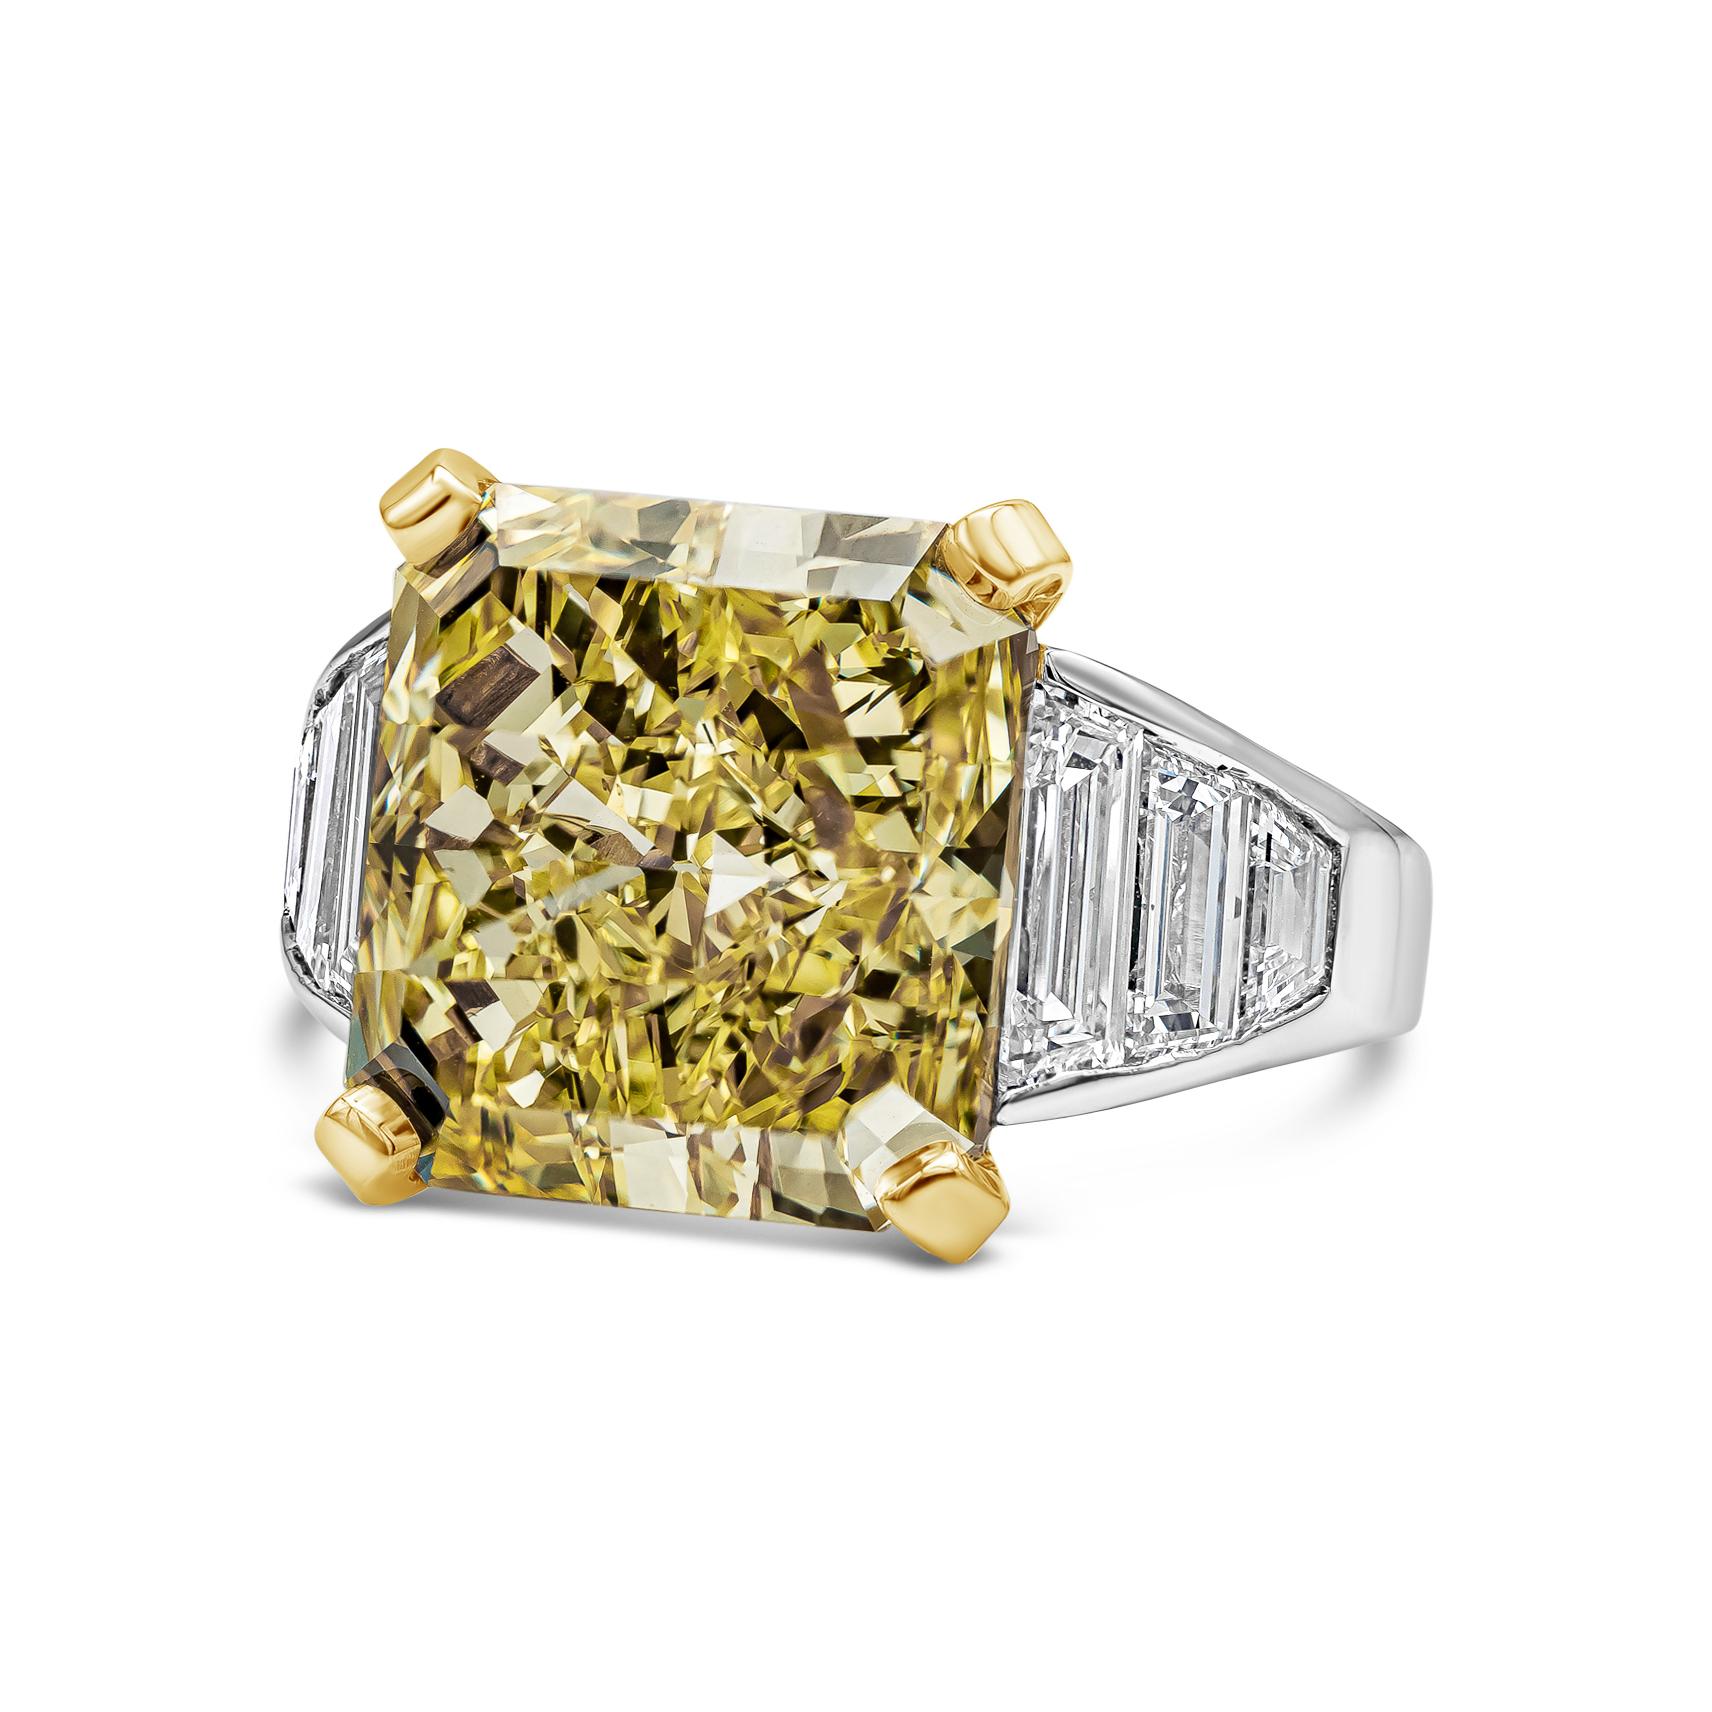 Elegantly made high end engagement ring featuring a color-rich radiant cut diamond weighing 11.30 carats, set in a four prong 18k yellow gold basket. Flanked by 6 custom-cut trapezoid diamonds channel set in platinum . Accent diamonds weigh 2.08